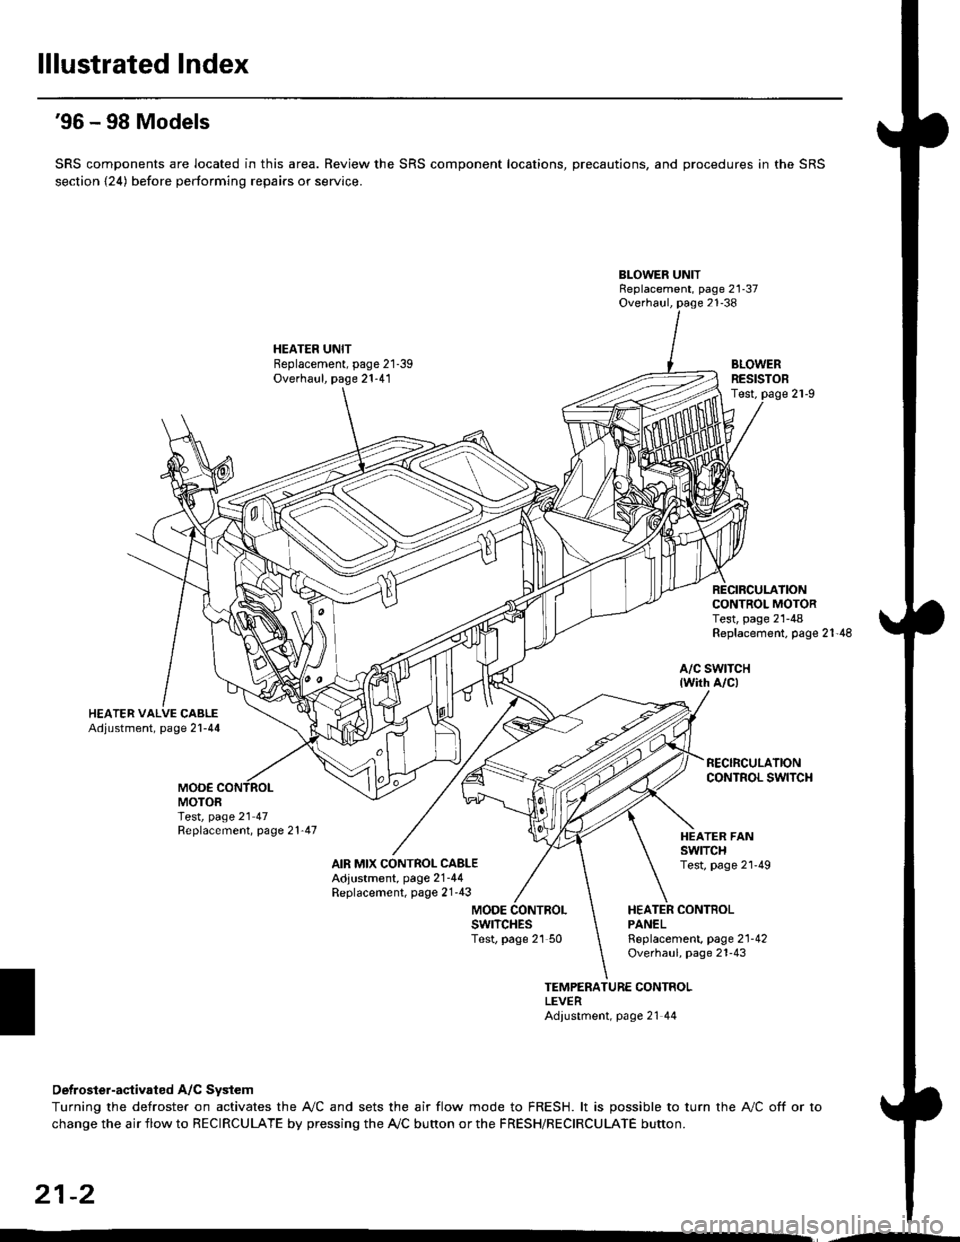 HONDA CIVIC 1996 6.G Owners Guide lllustrated Index
96 - 98 Models
SRS components are located in this area. Review the SRS component locations, precautions, and procedures in the SRS
section {24) before performing repairs or service.